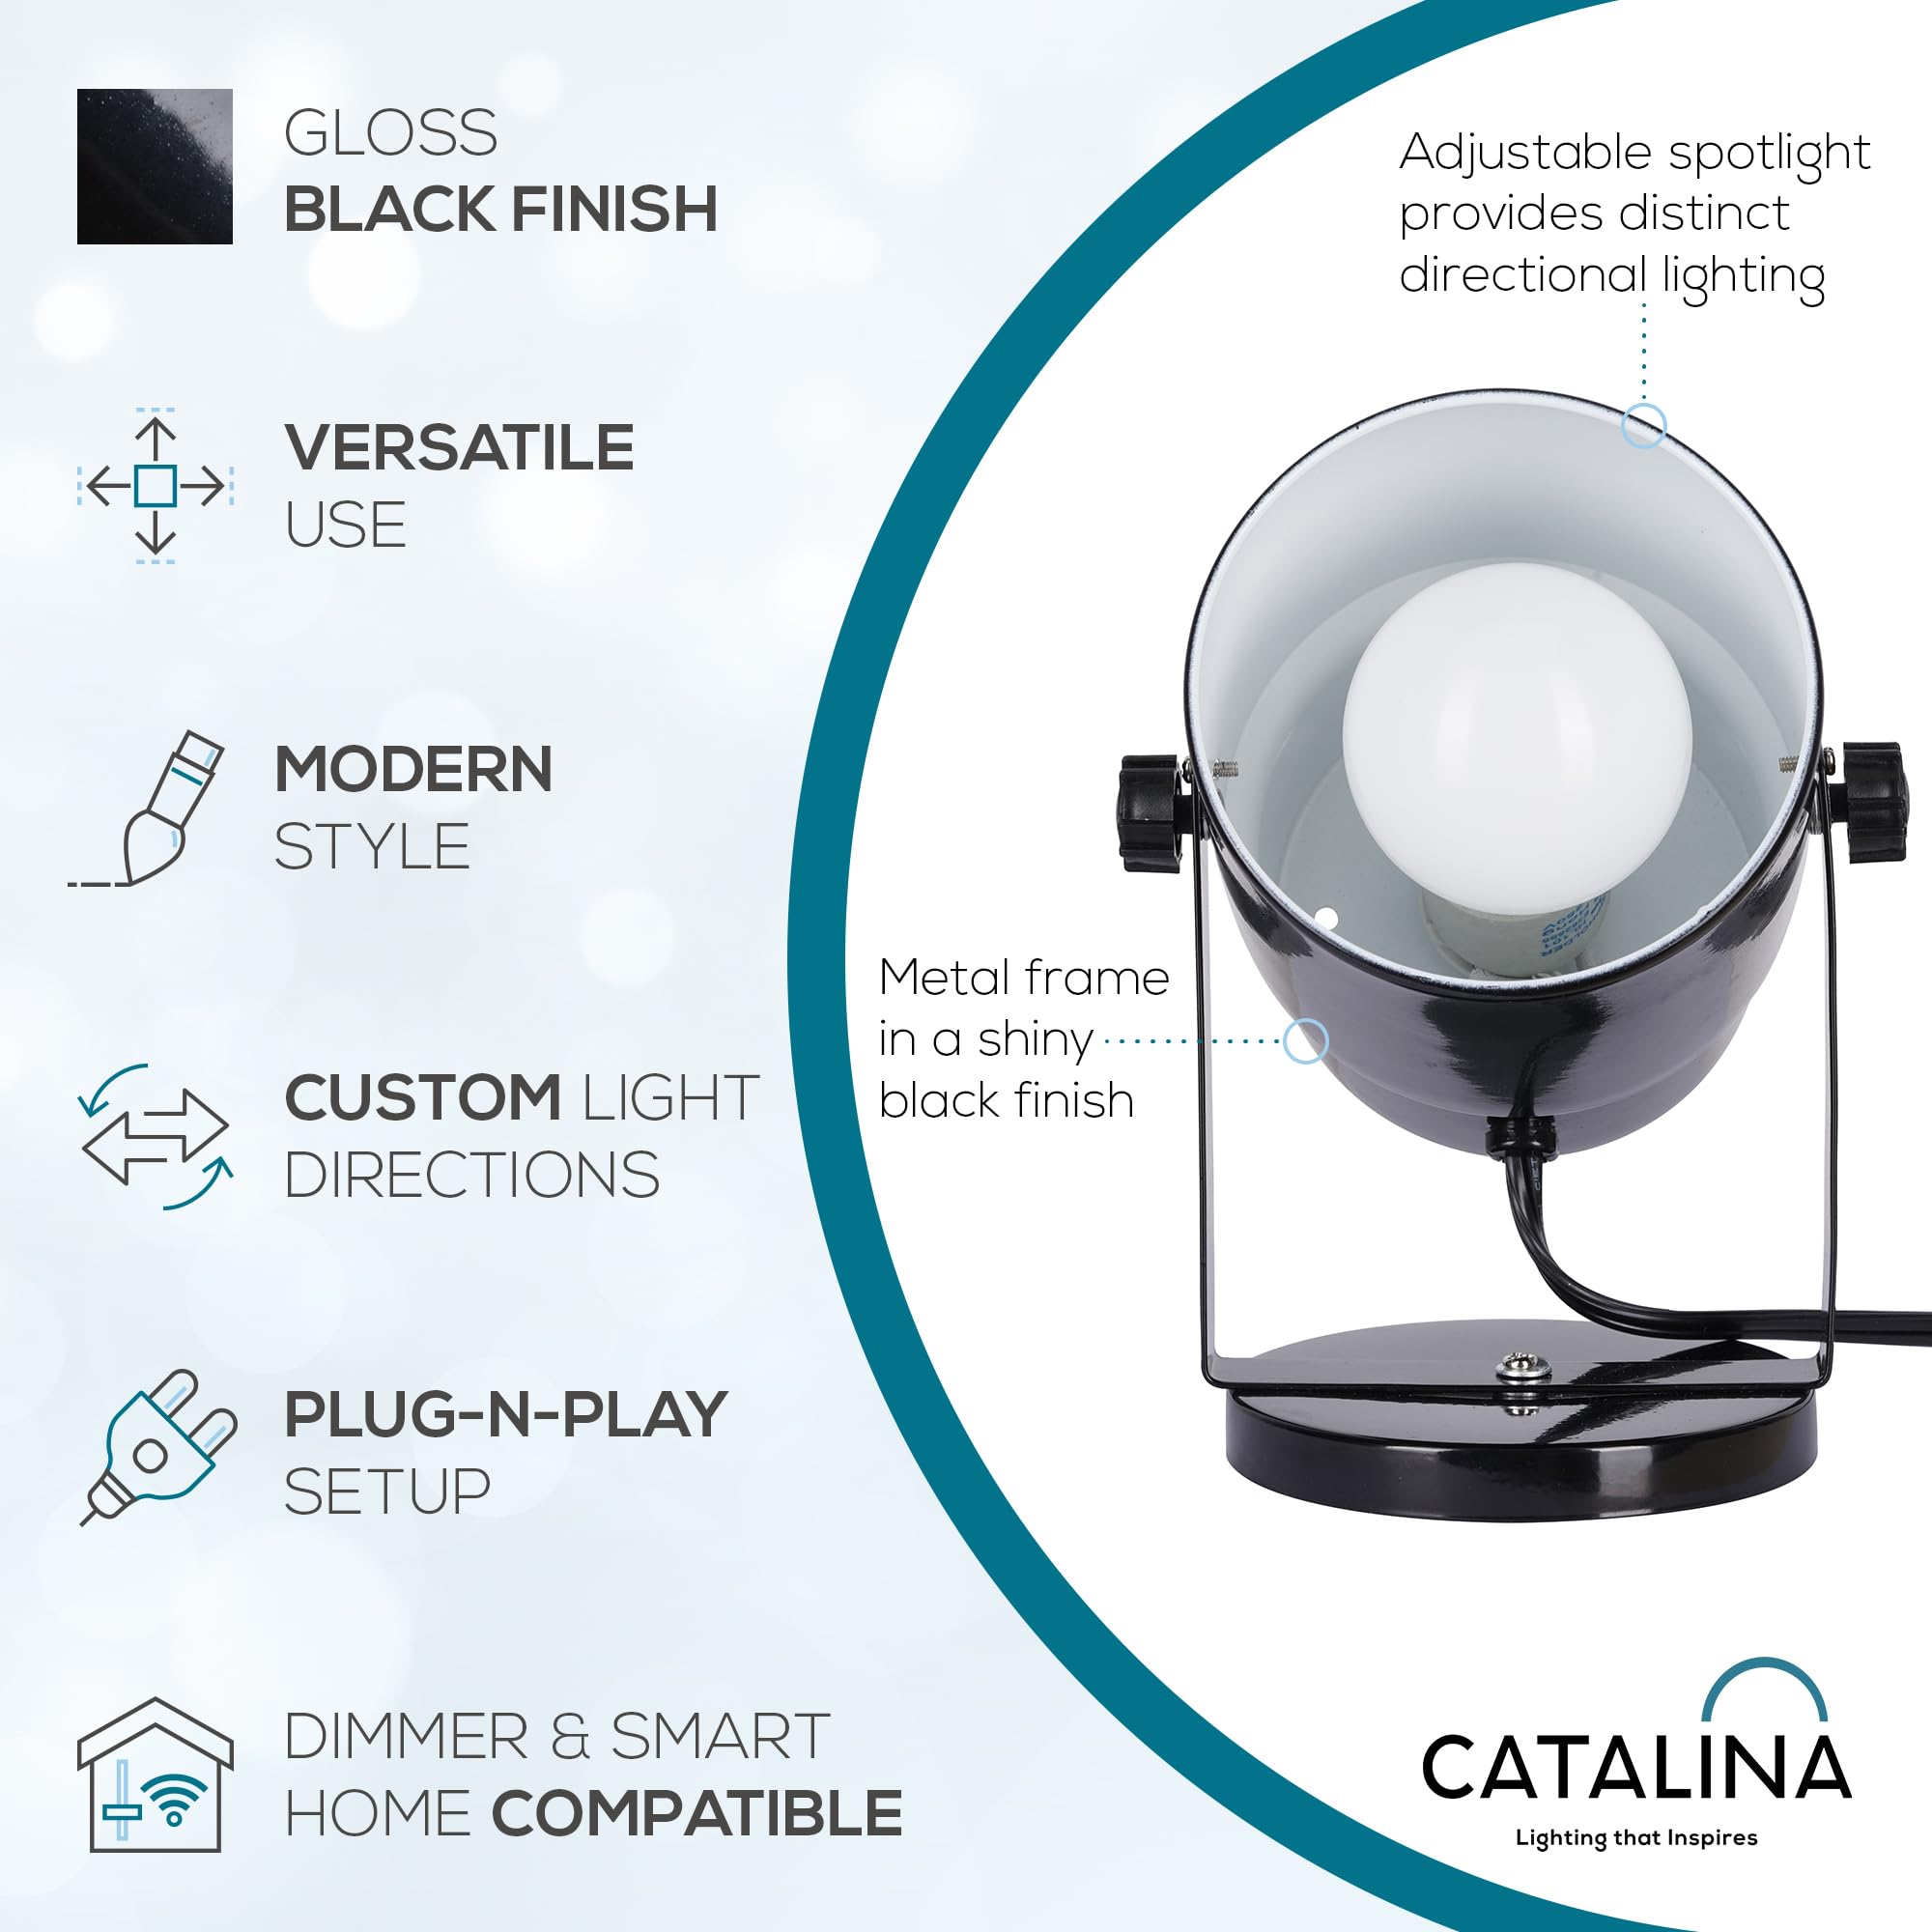 Catalina Lighting 24291-000 Multipurpose Spotlight Accent Lamp, Desk or Wall Mount Lamp for Office, Living Room, Dorm or Bedroom, Smart Home Compatible, Bulb Not Included, 7.5